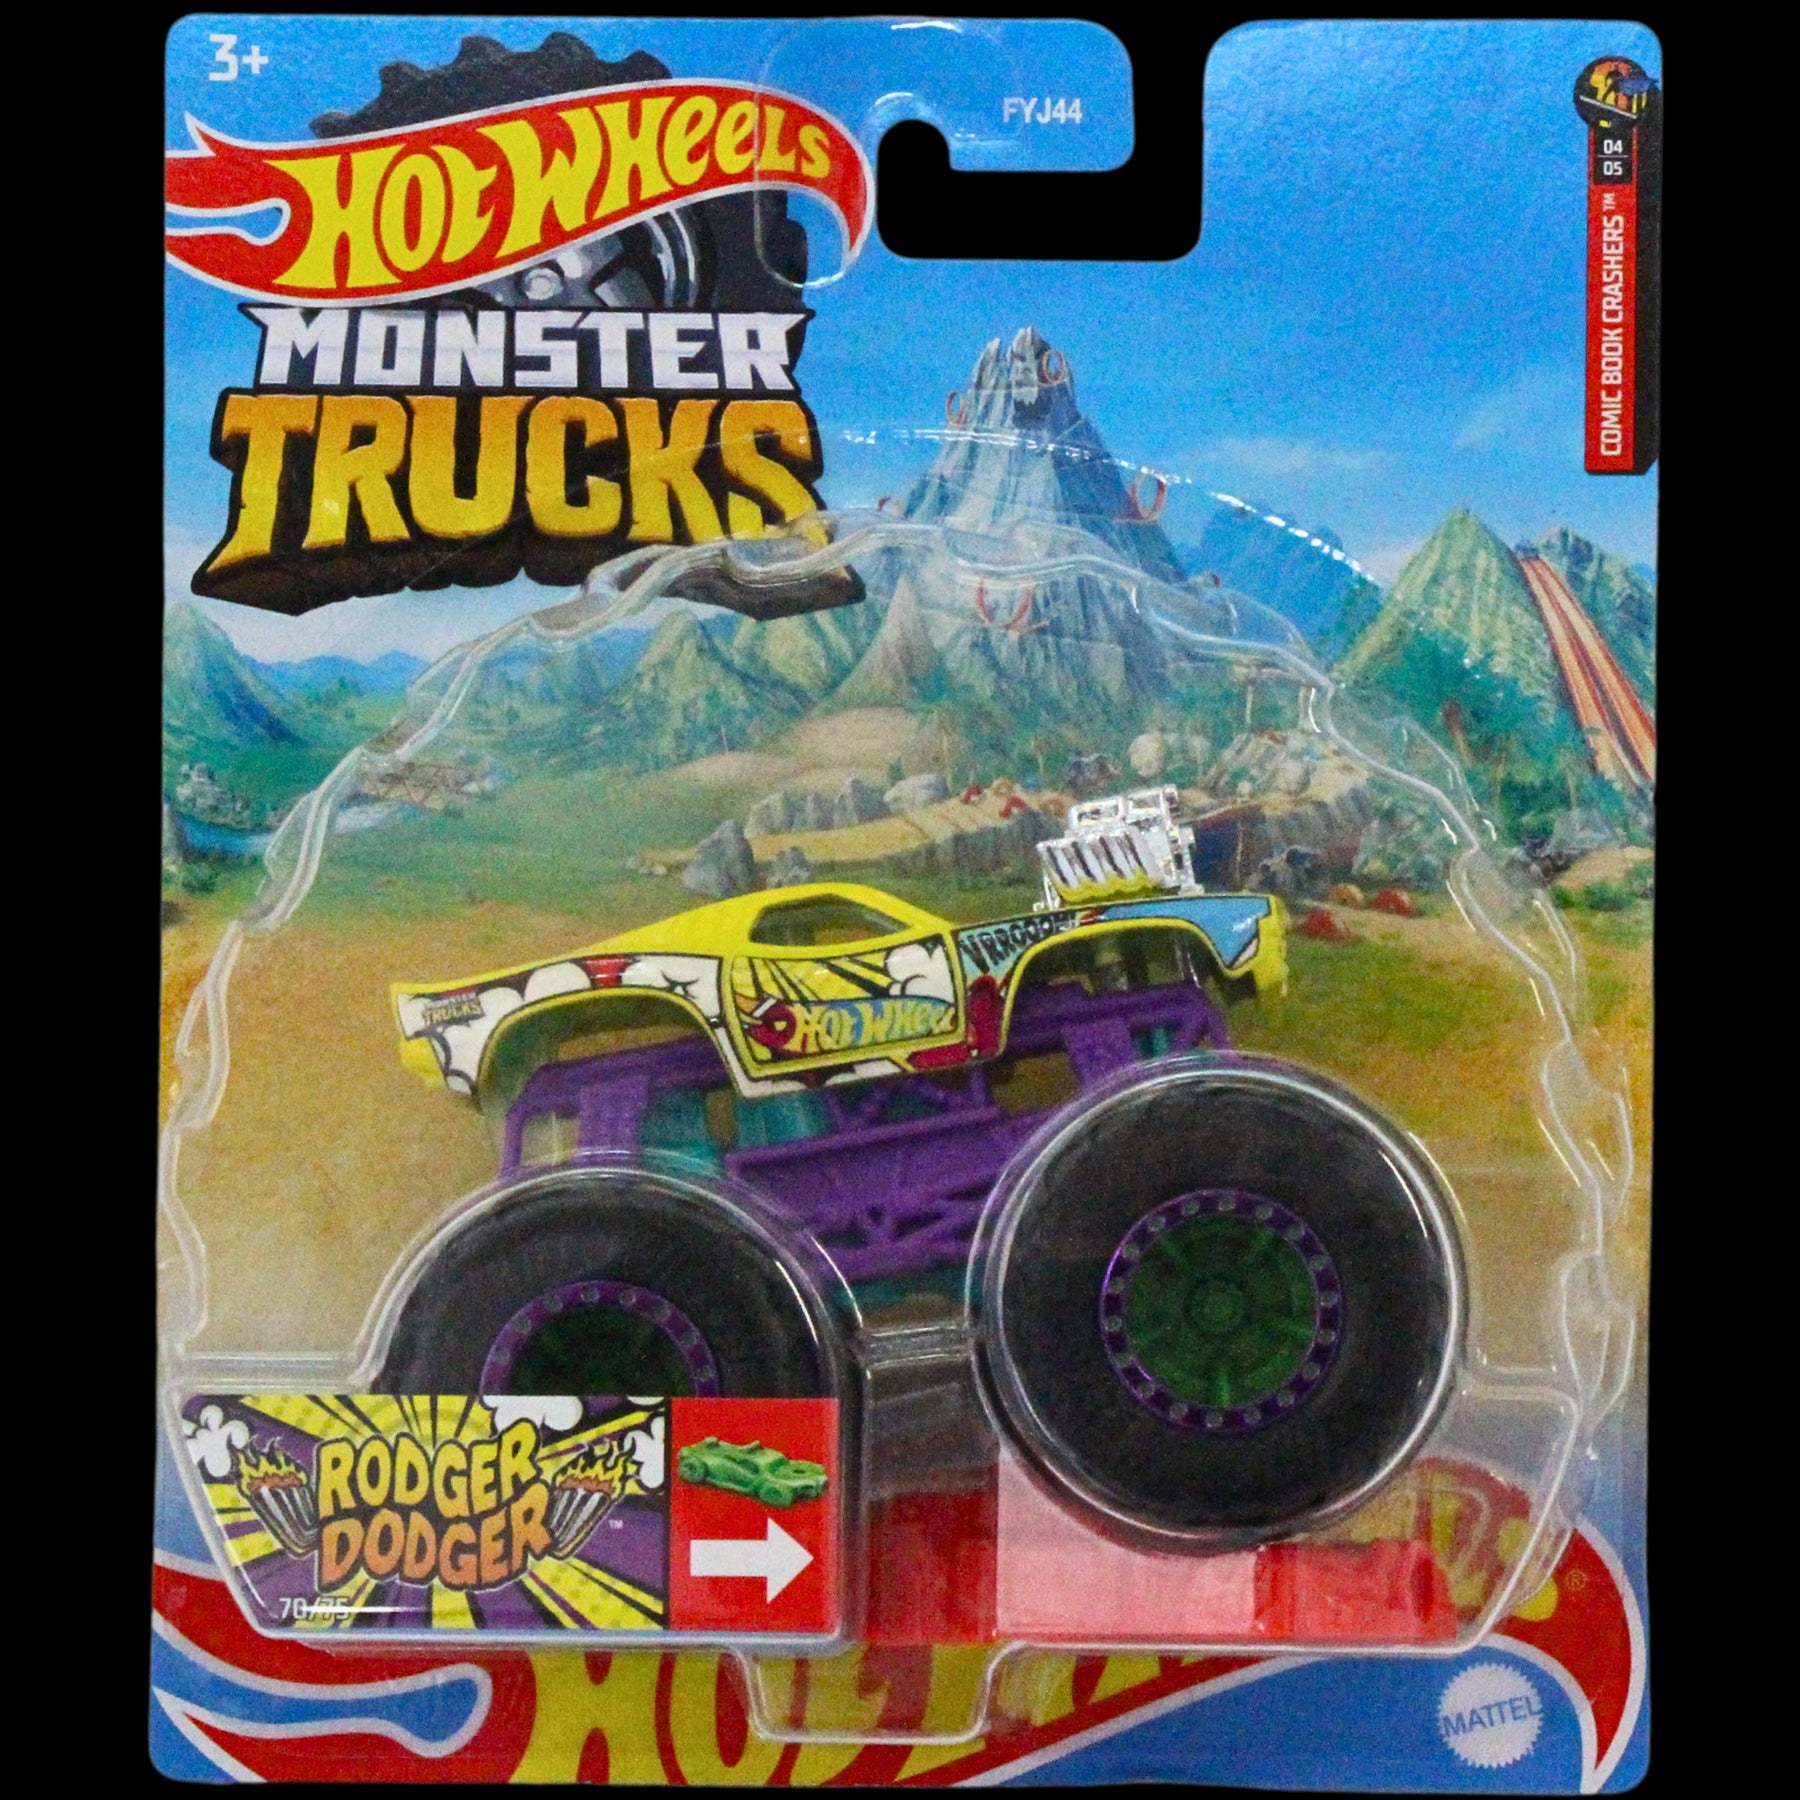 Hot Wheels Monster Trucks - 1:64 Scale Diecast - Rodger Dodger & HW Pizza Co - Twin Pack - Toptoys2u